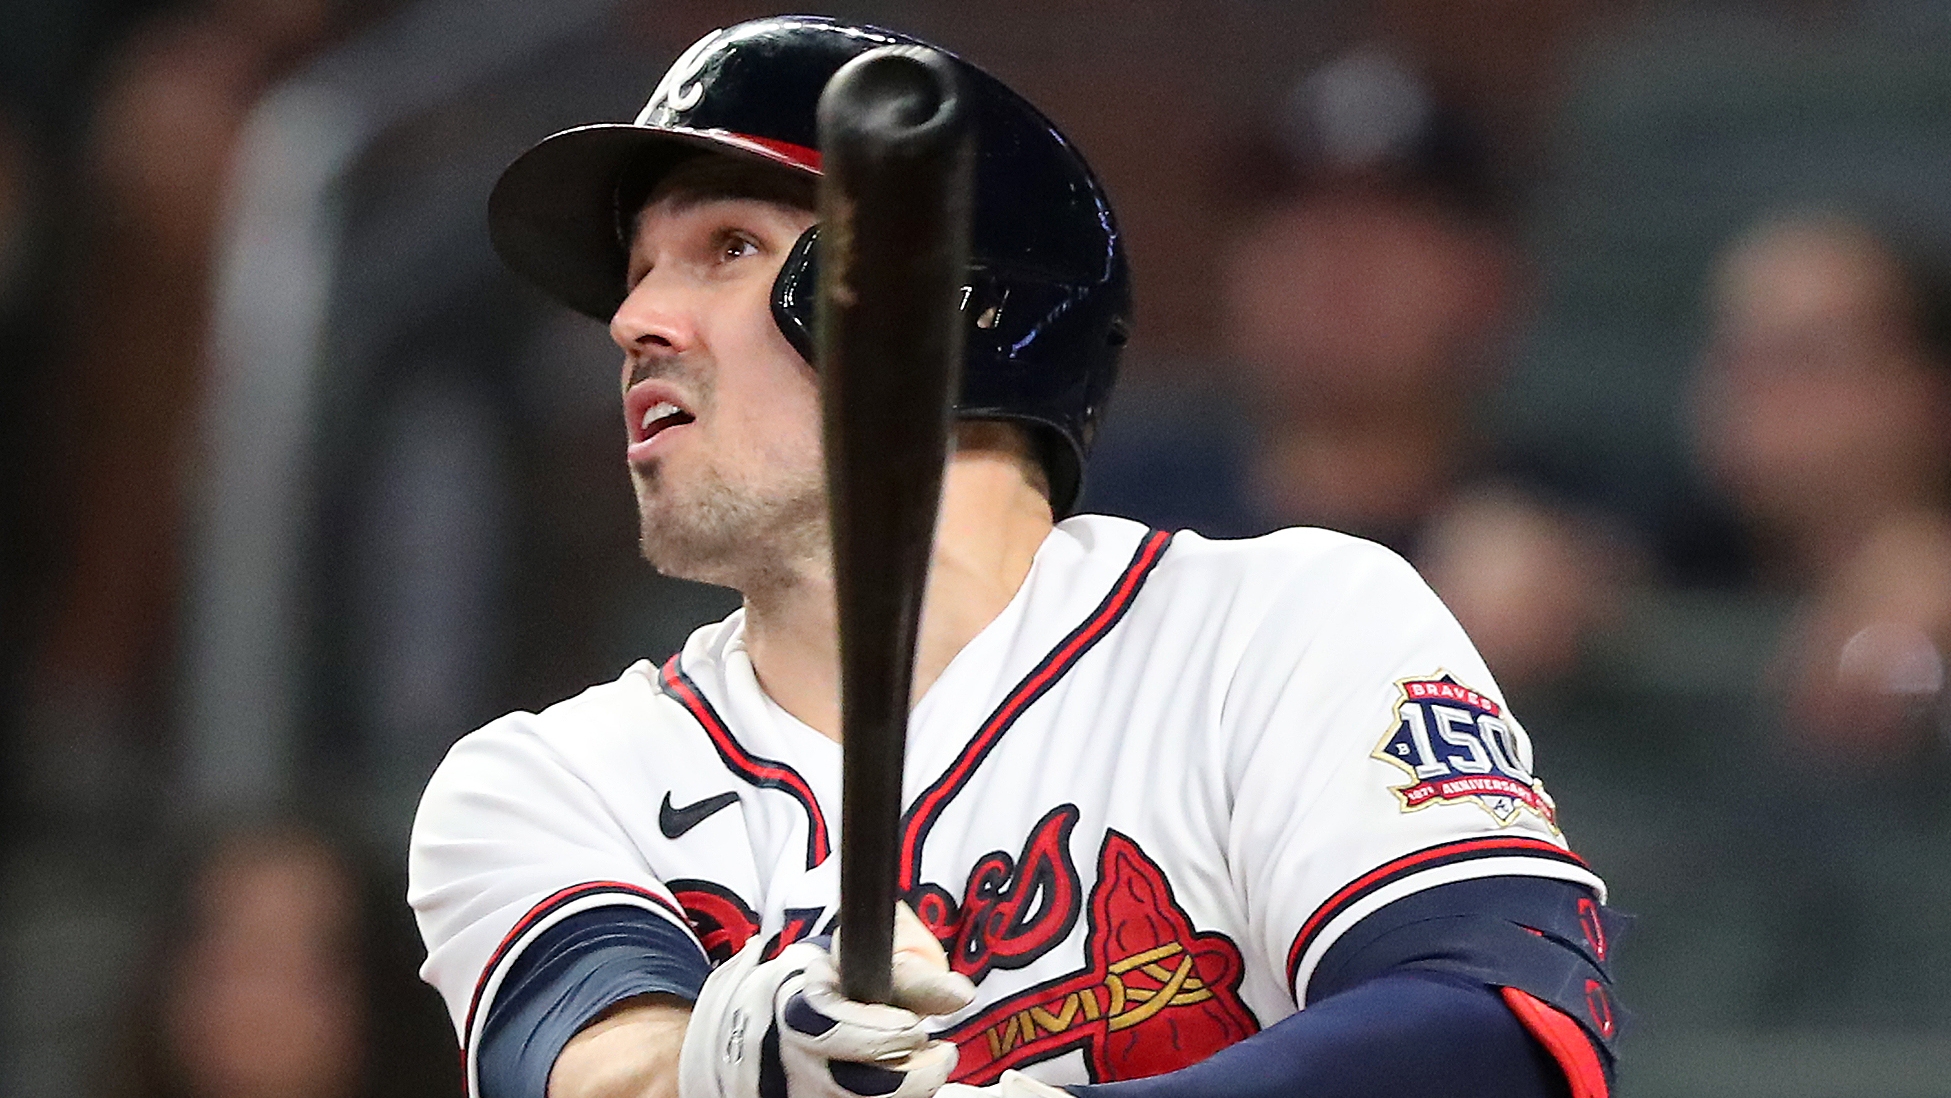 Braves strike out (so far) in attempt to trade for Adam Duvall